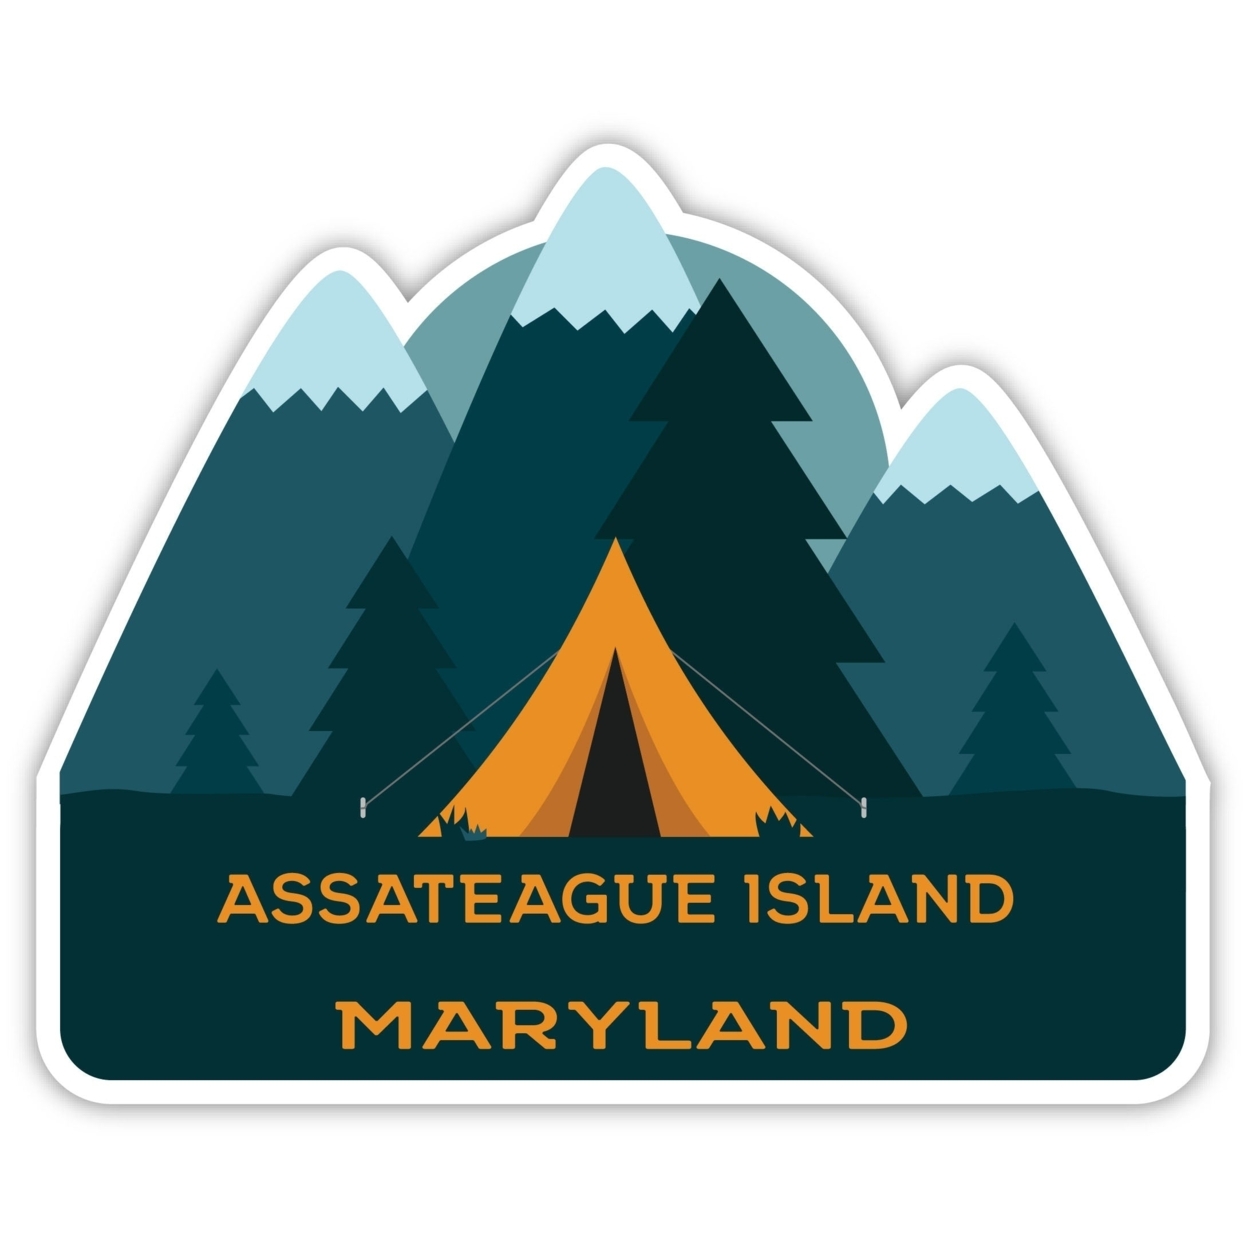 Assateague Island Maryland Souvenir Decorative Stickers (Choose Theme And Size) - 4-Pack, 10-Inch, Tent